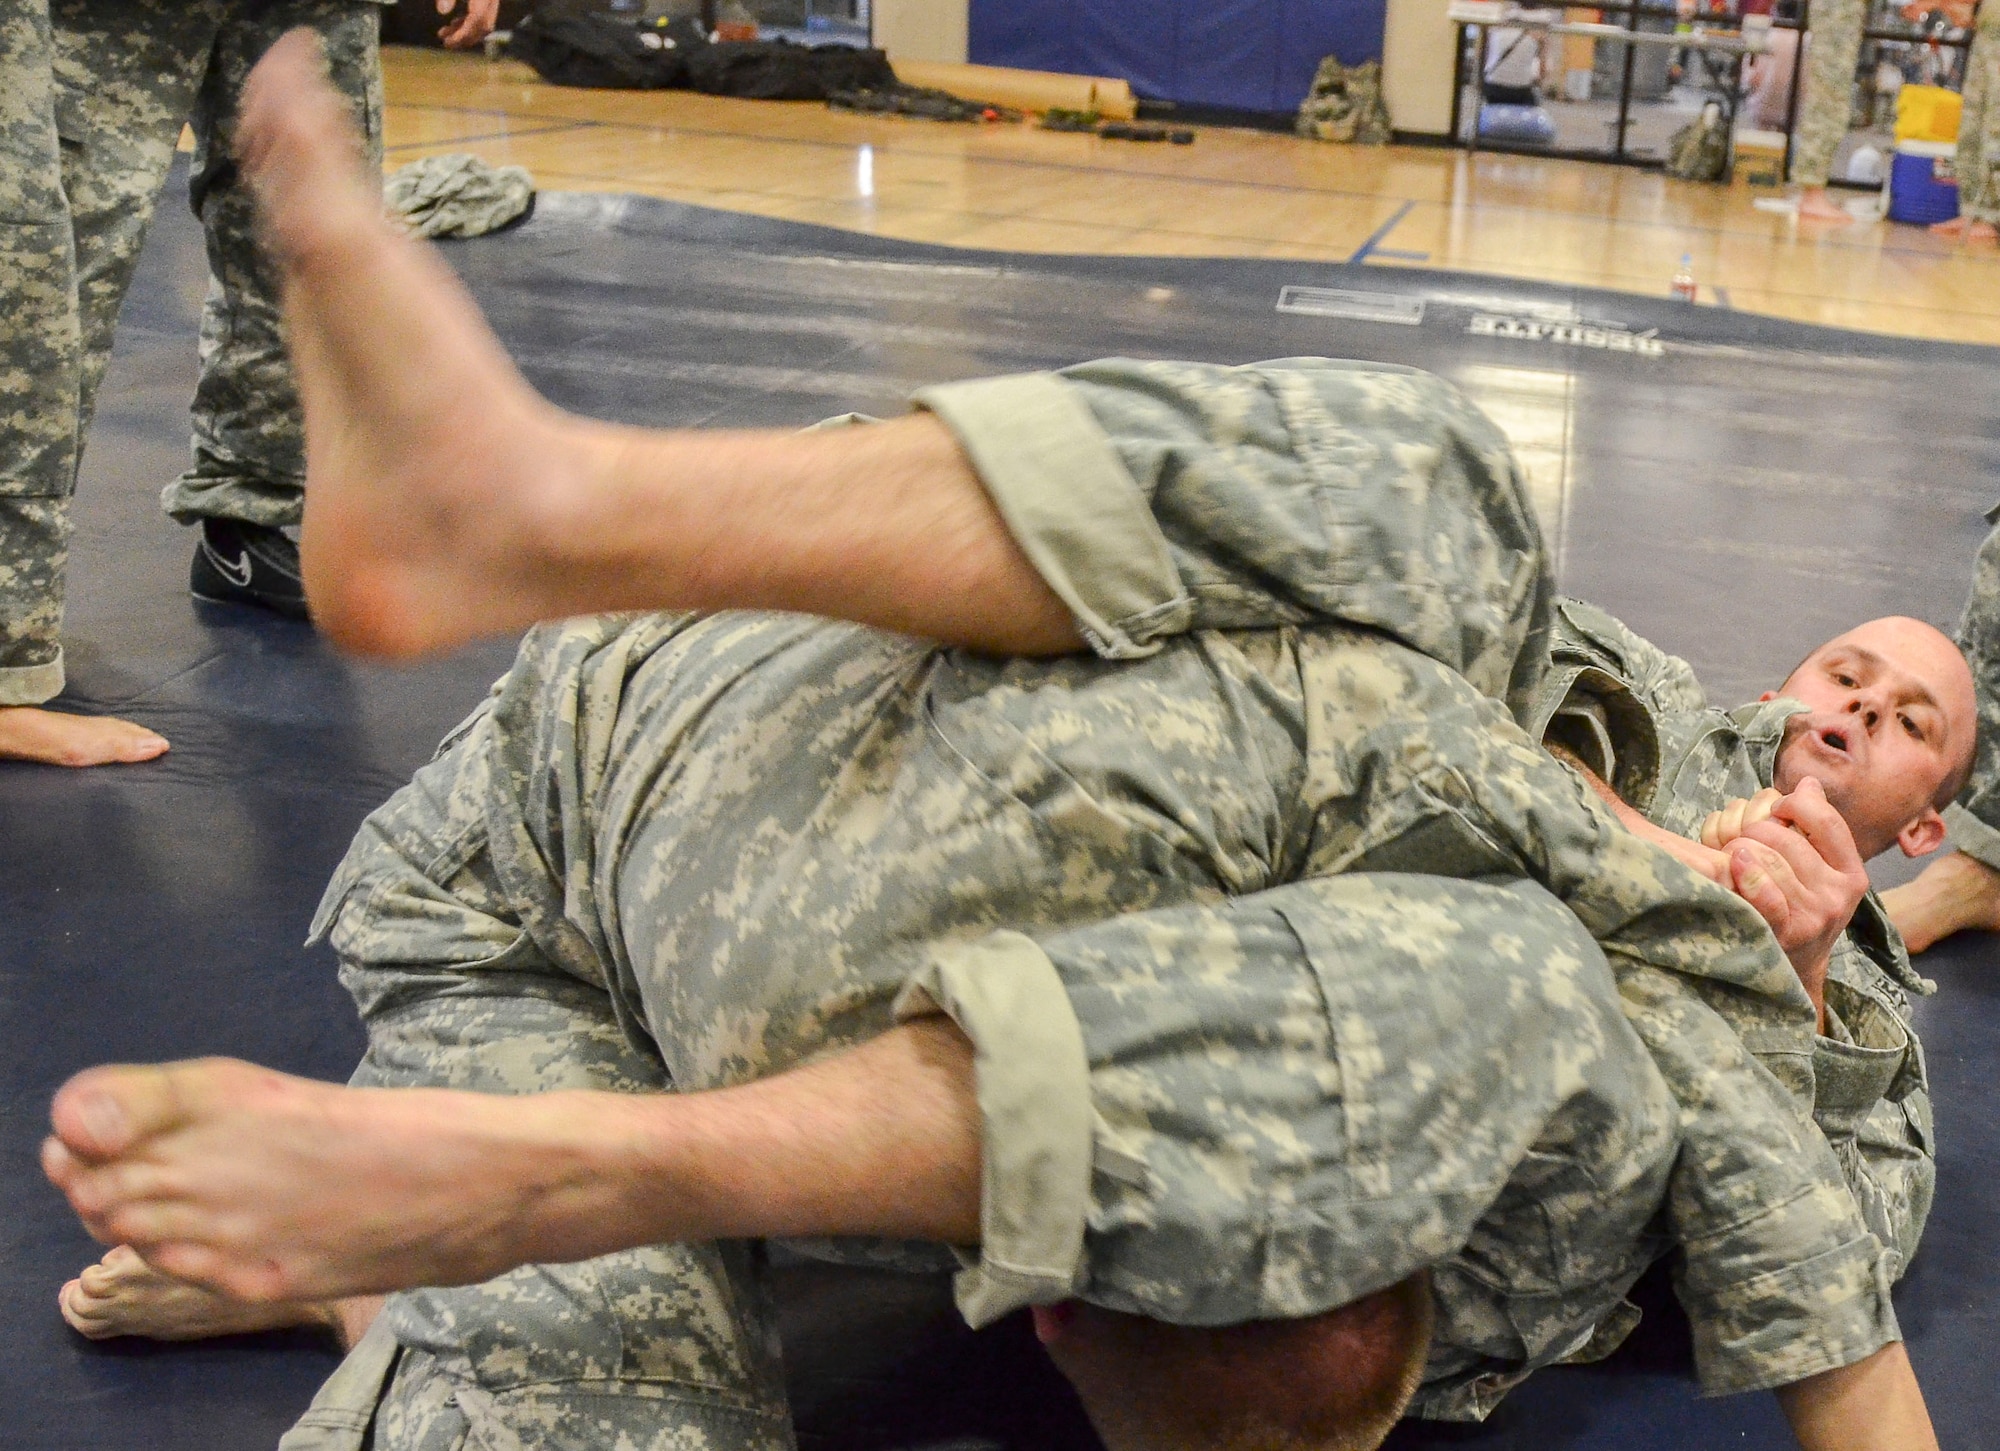 Sgt. 1st Class Logan Reiser, 1st Battlefield Coordination Detachment, attempts a submission on Private 1st Class Acea Hindbaugh, 1st Battlefield Coordination Detachment, during the Modern Army Combatives Program (MACP) Basic Combatives Course Level 1 at Davis-Monthan Air Force Base, Ariz., Jan. 16, 2014. The 40-hour course focuses on the three phases of basic fighting strategy; close the distance, gain the dominate position, and how to finish the fight. (U.S. Air Force photo by Staff Sgt. Adam Grant/Released)